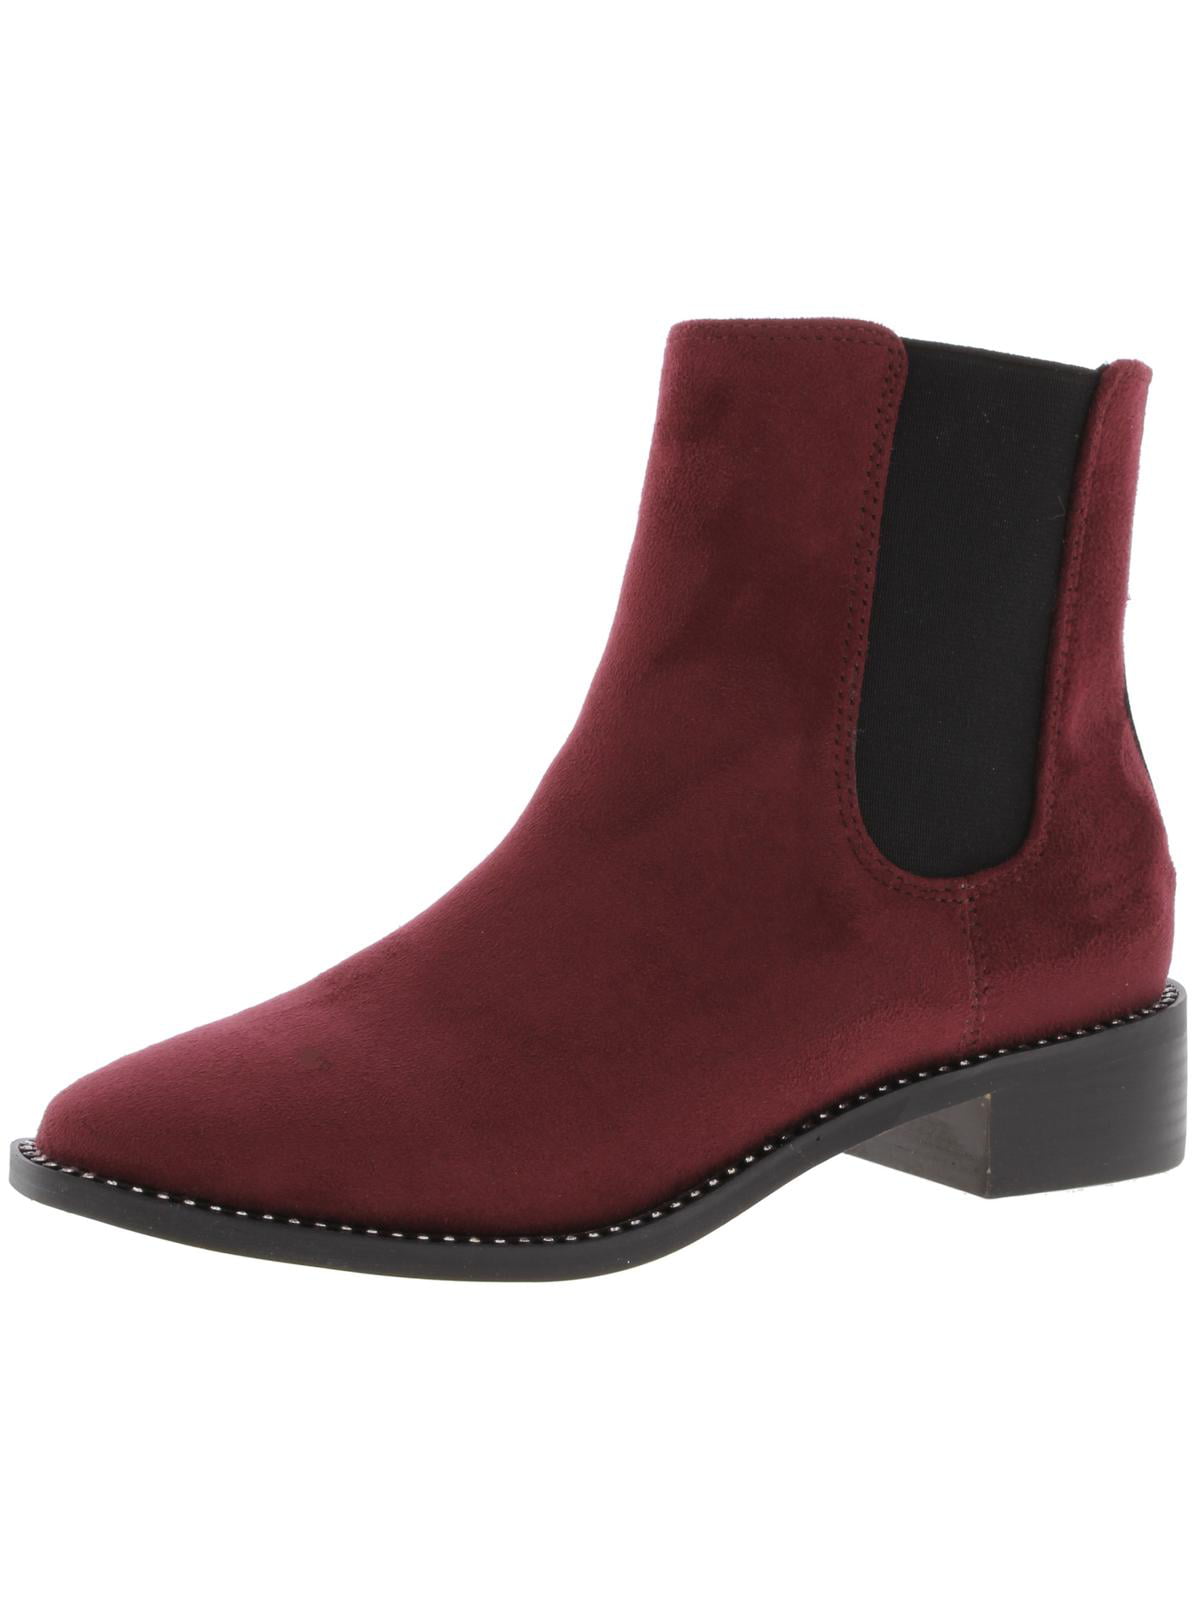 bebe ankle boots